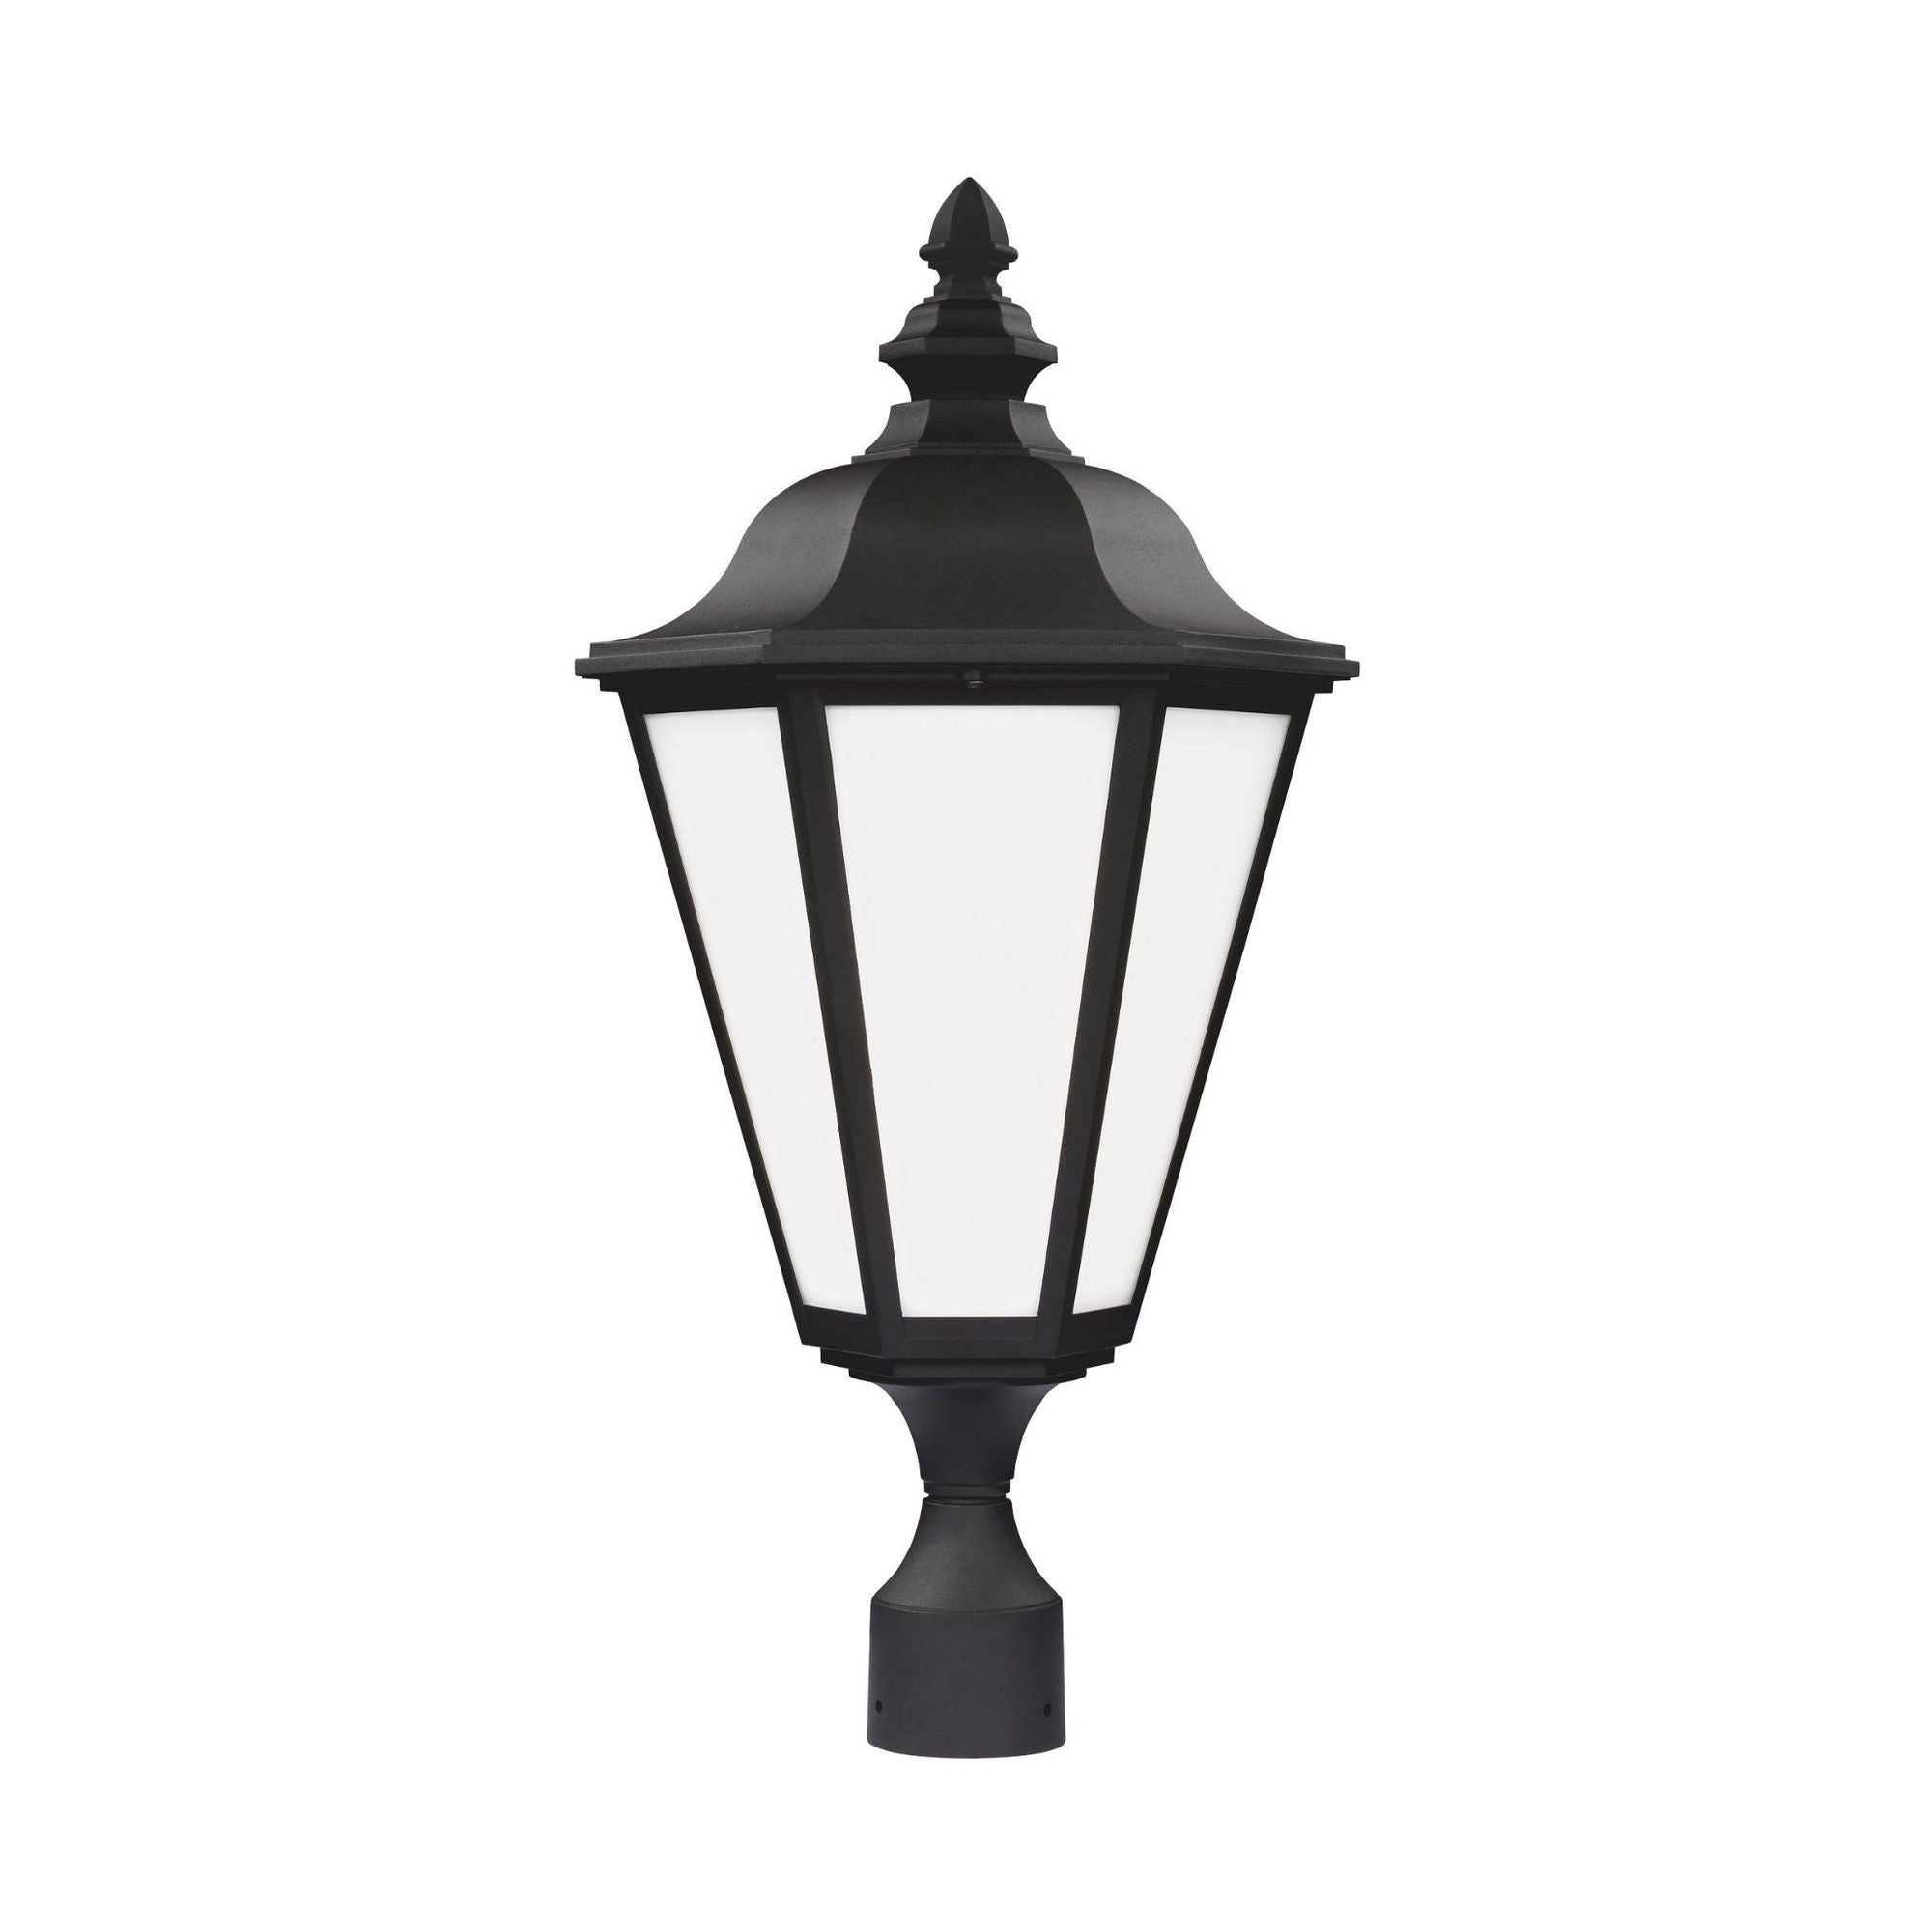 Brentwood One Light Outdoor Post Lantern LED Traditional Fixture 25.75" Height Die Cast Aluminum Irregular Smooth White Shade in Black